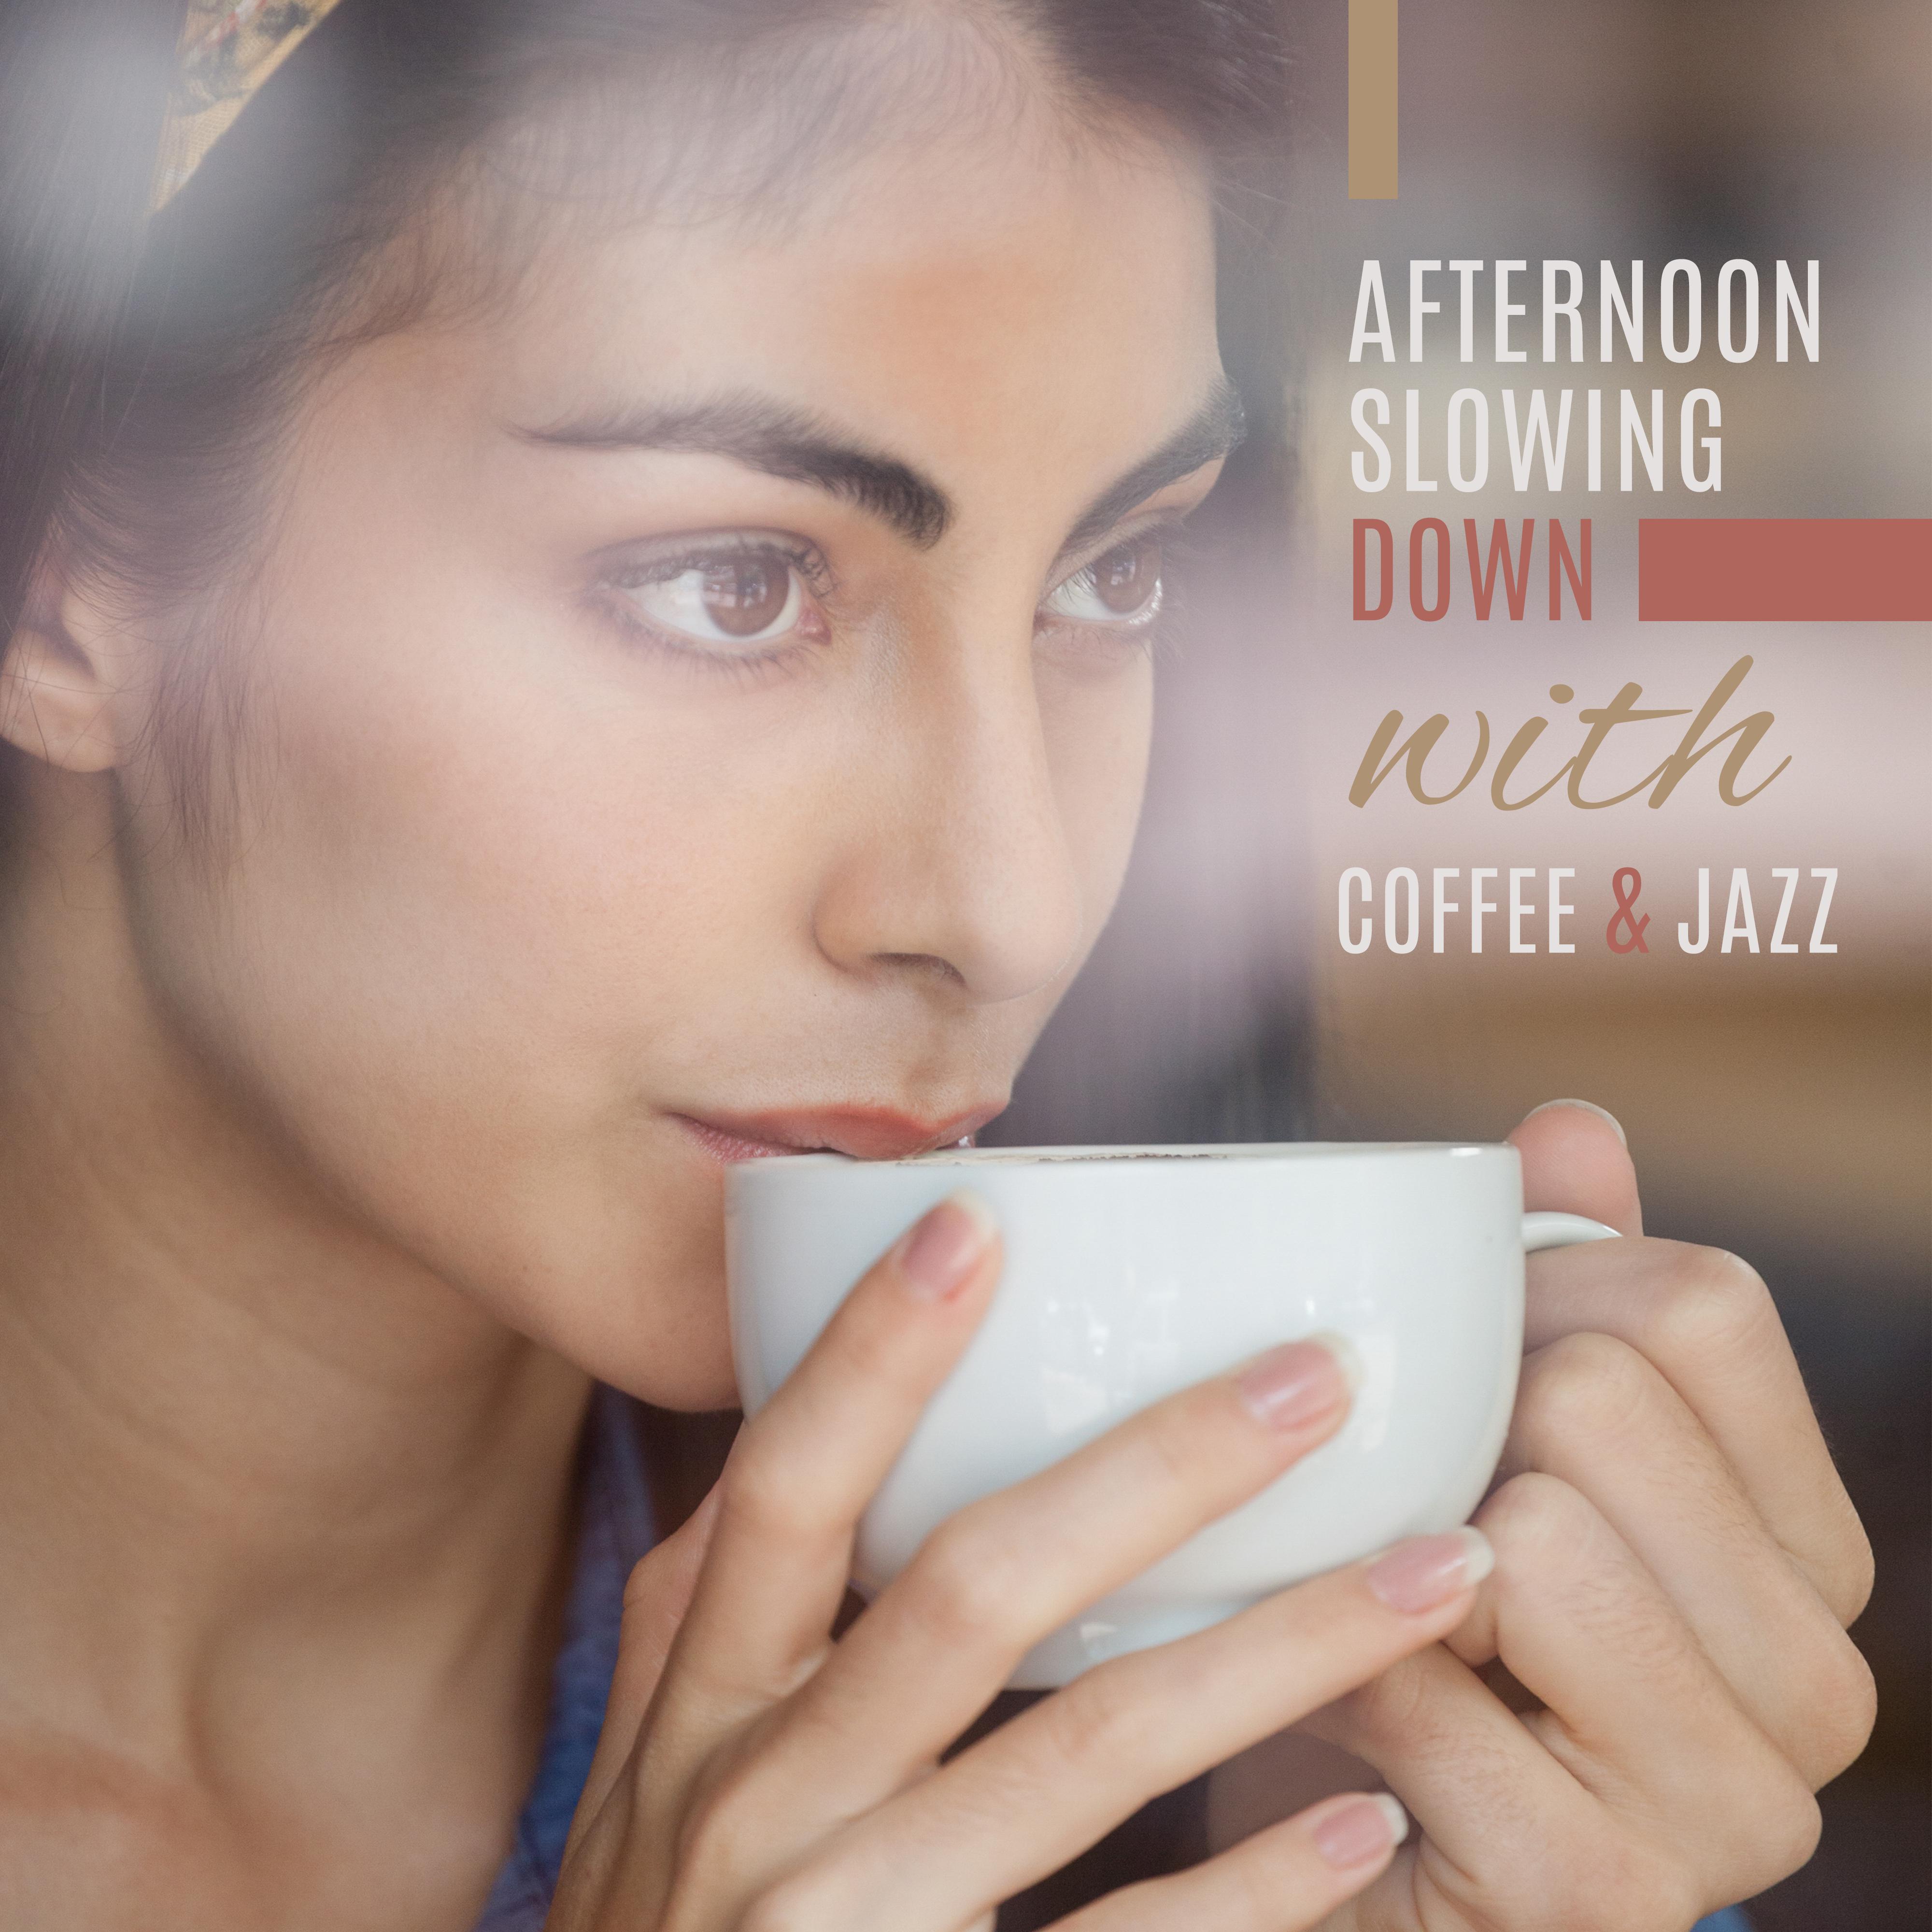 Afternoon Slowing Down with Coffee & Jazz: 2019 Soft Smooth Jazz Music Selection for Total Relaxation with Coffee at Home or Cafe, Soothing Piano Melodies, Vintage Sounds of Sax, Trumpet & Others